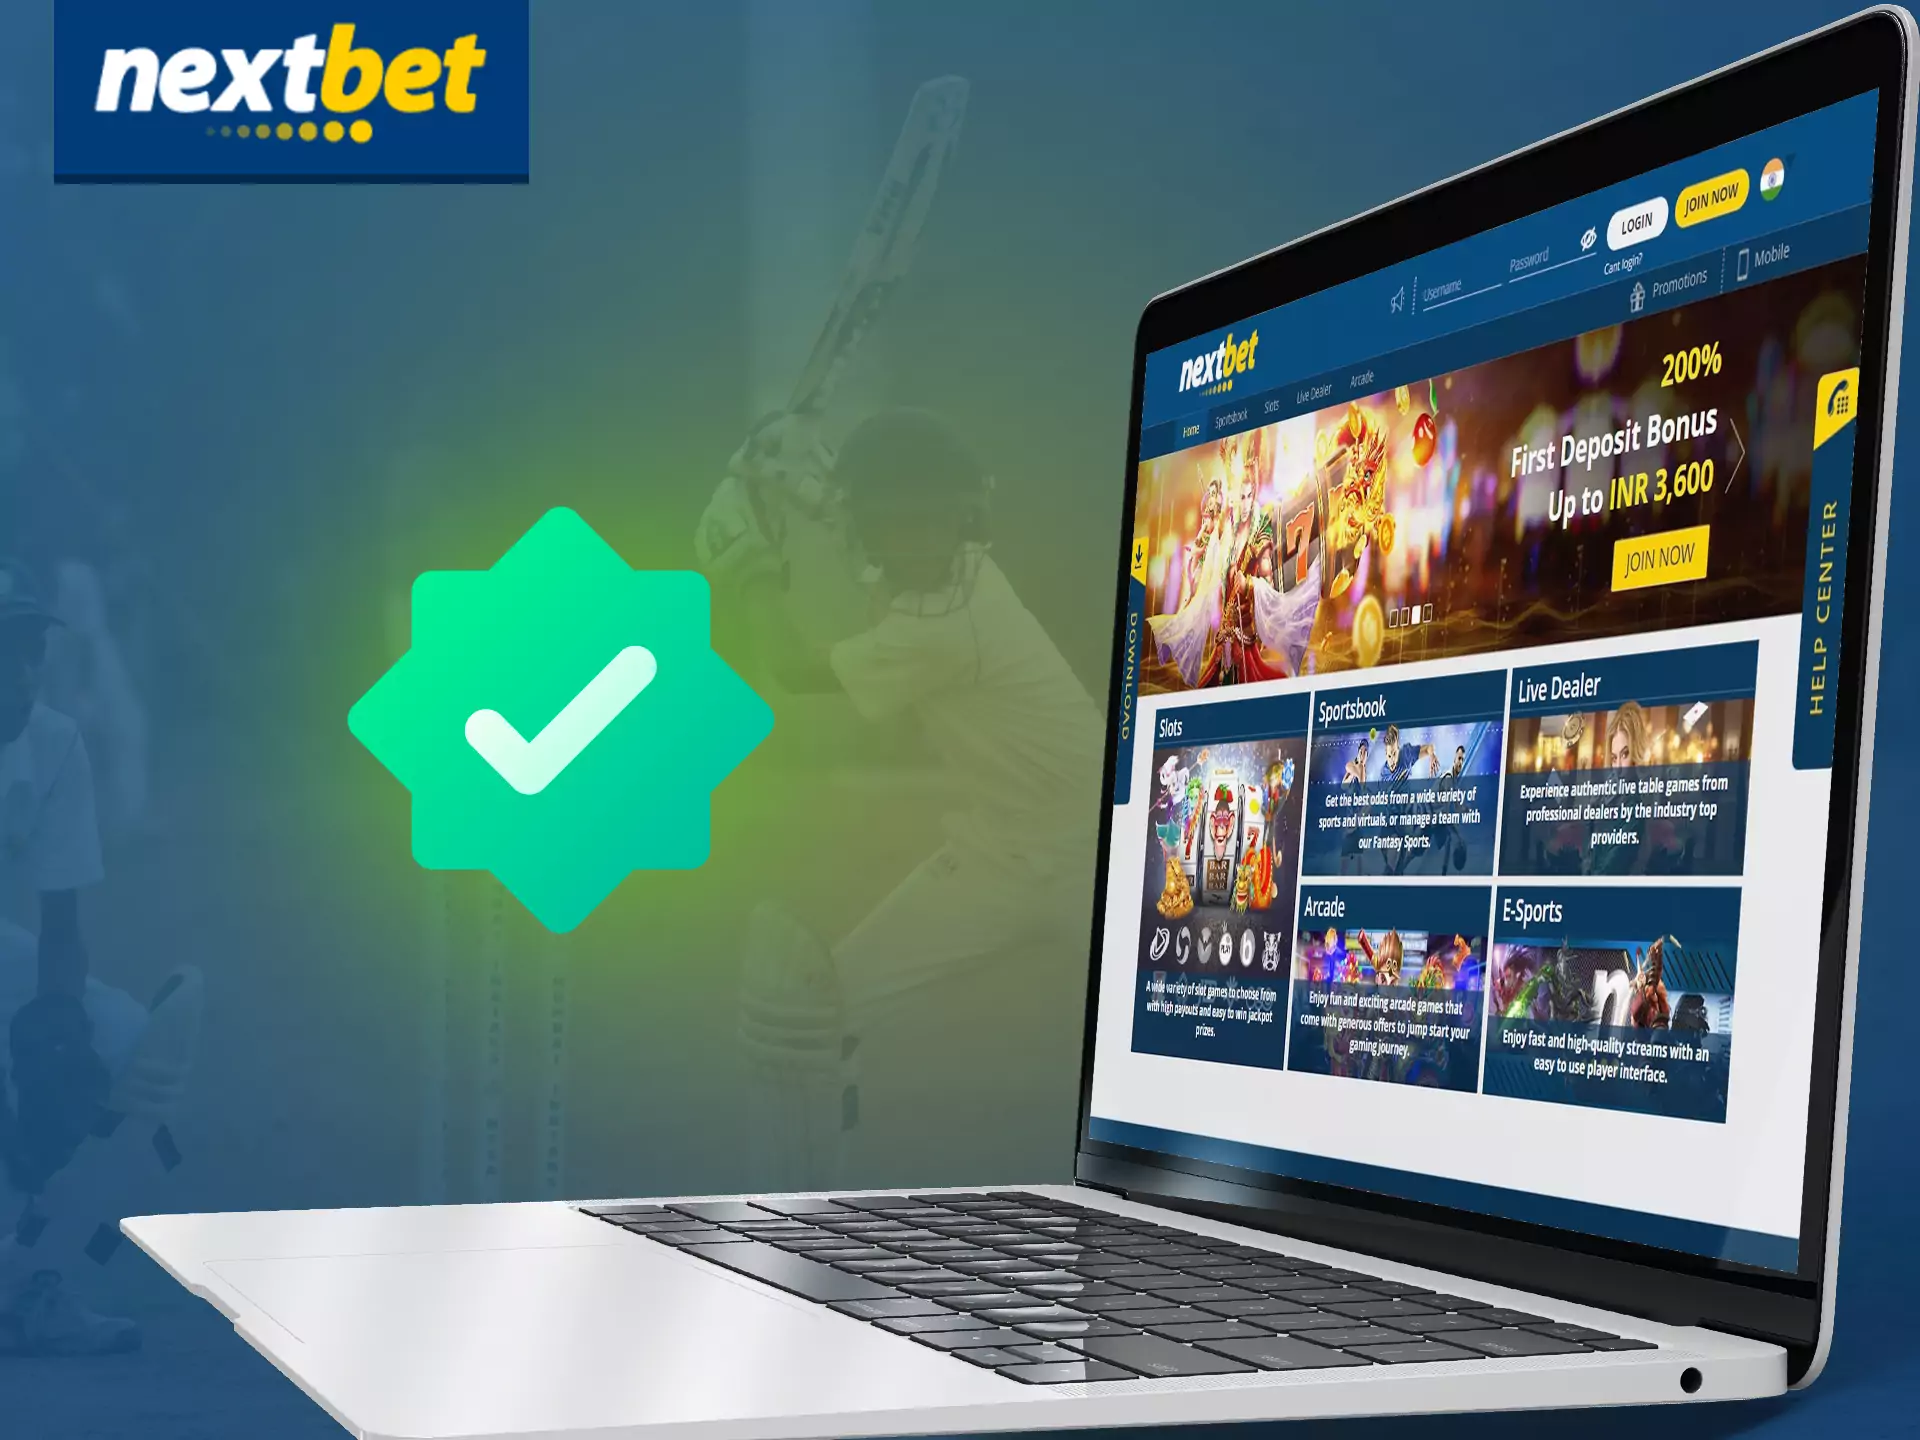 Verify your identity with the help of documents on Nextbet and use all the features and bonuses of the service.